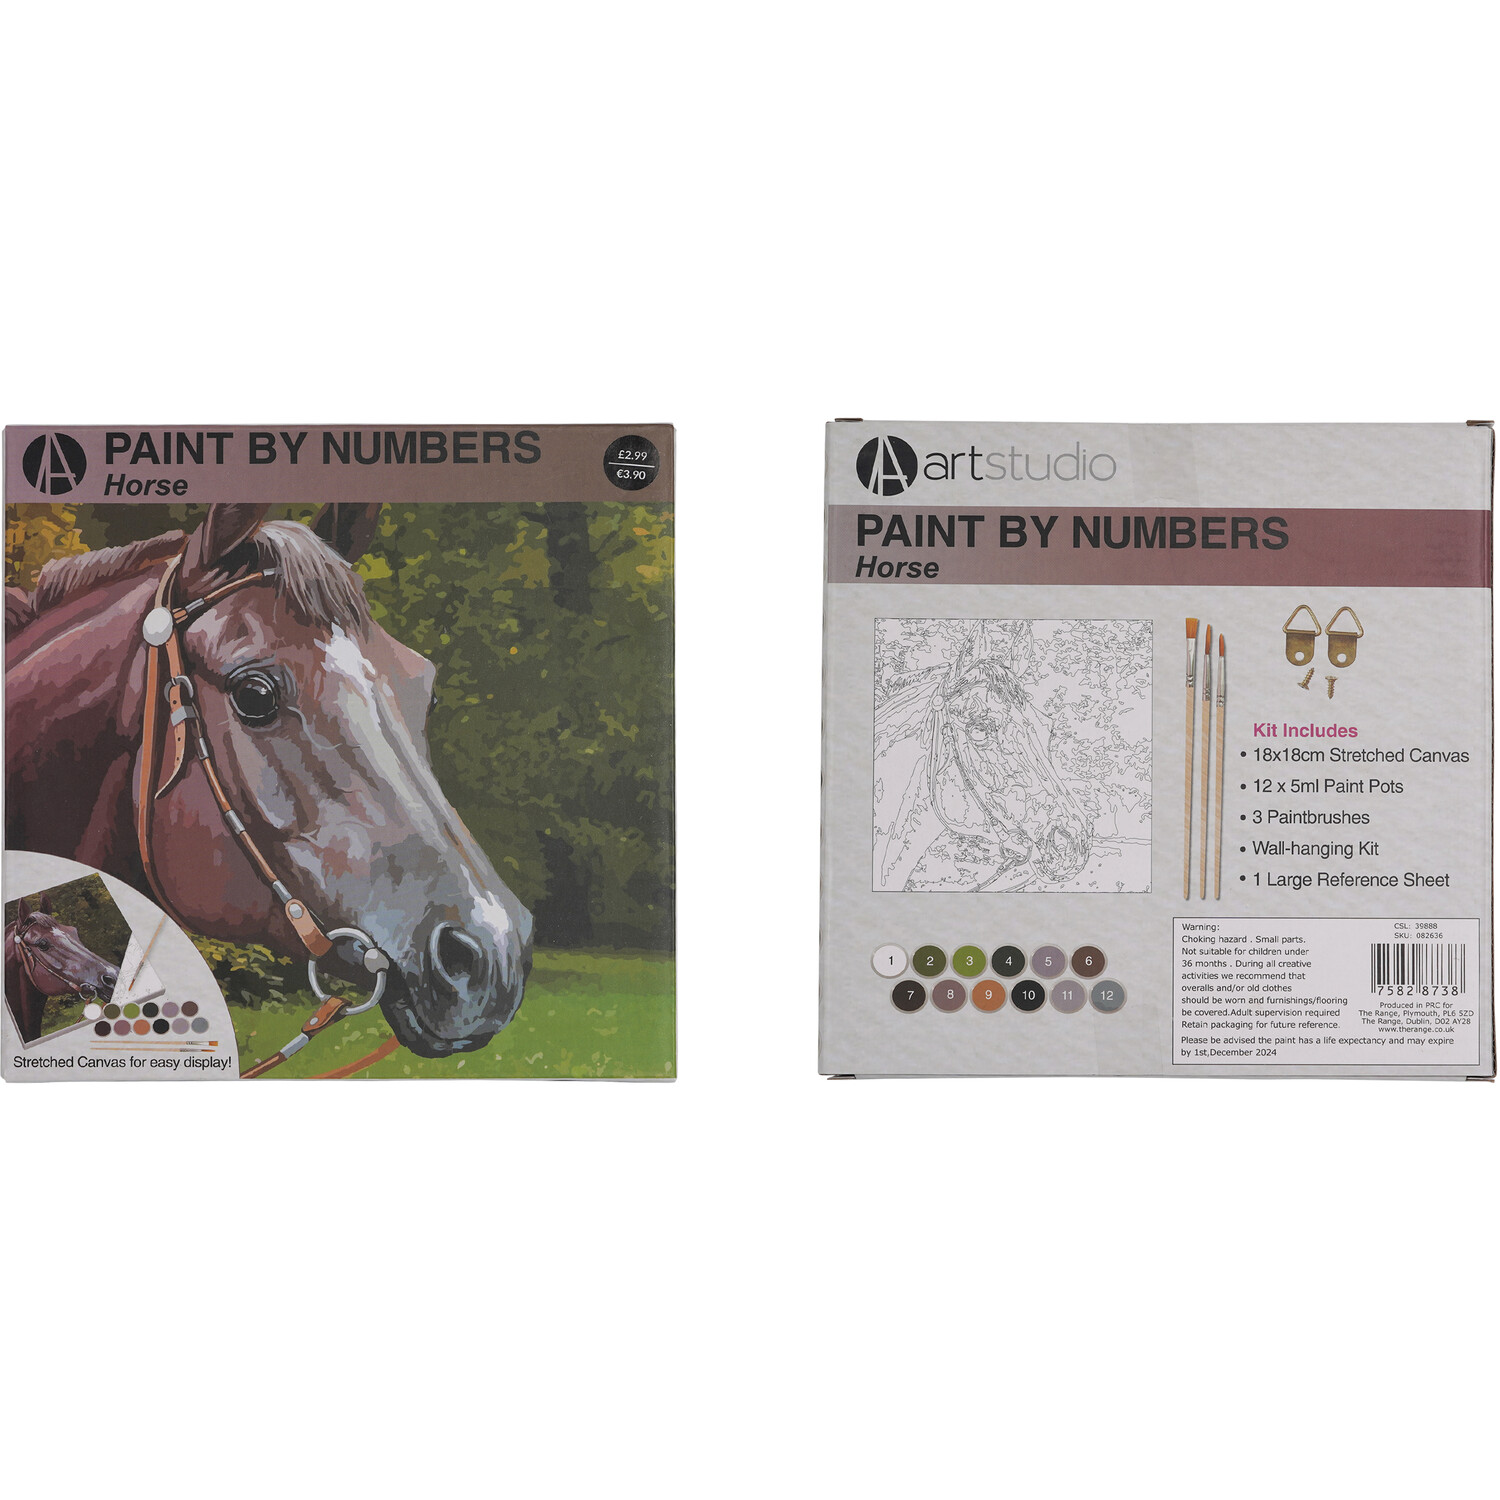 Art Studio Paint by Numbers - Horse Image 2